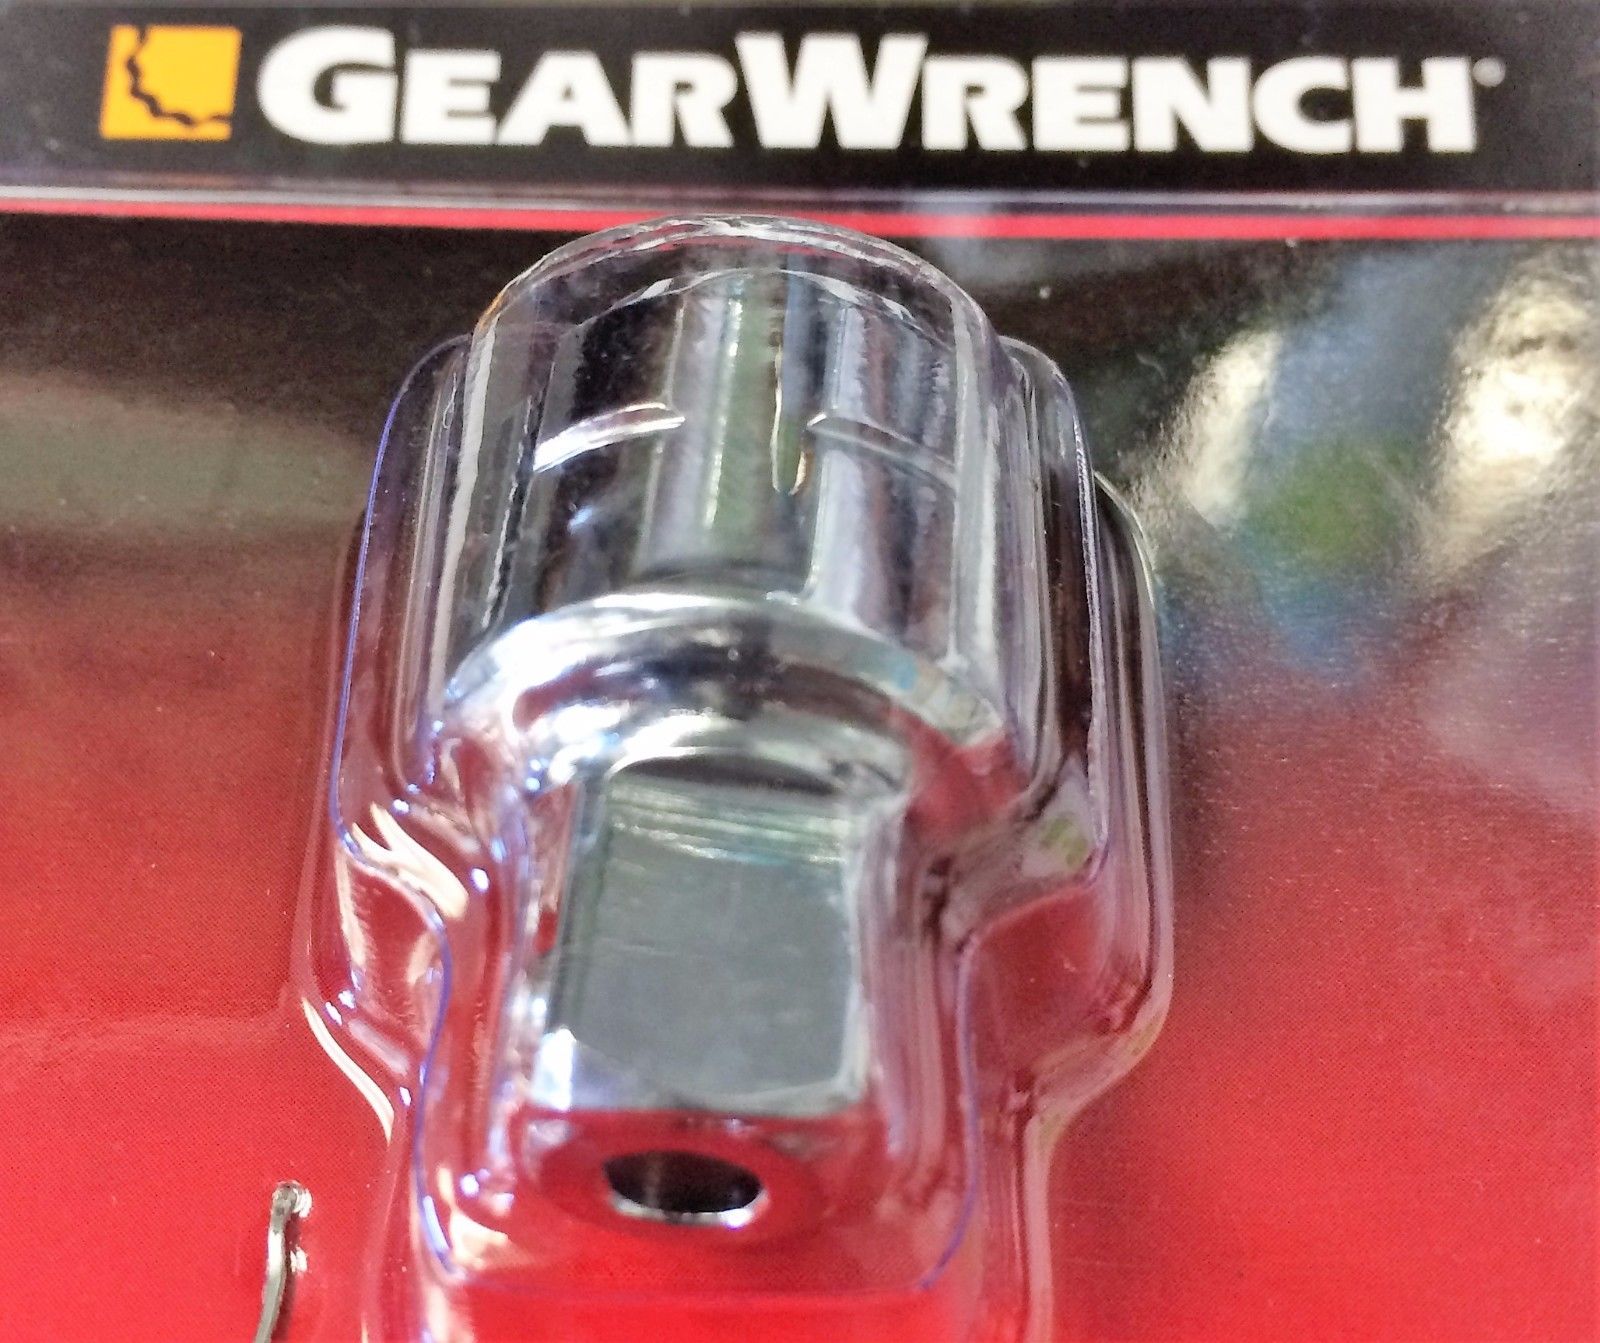 GearWrench 82803D Male Extension Adapter 3/8" Drive (2 Packs)